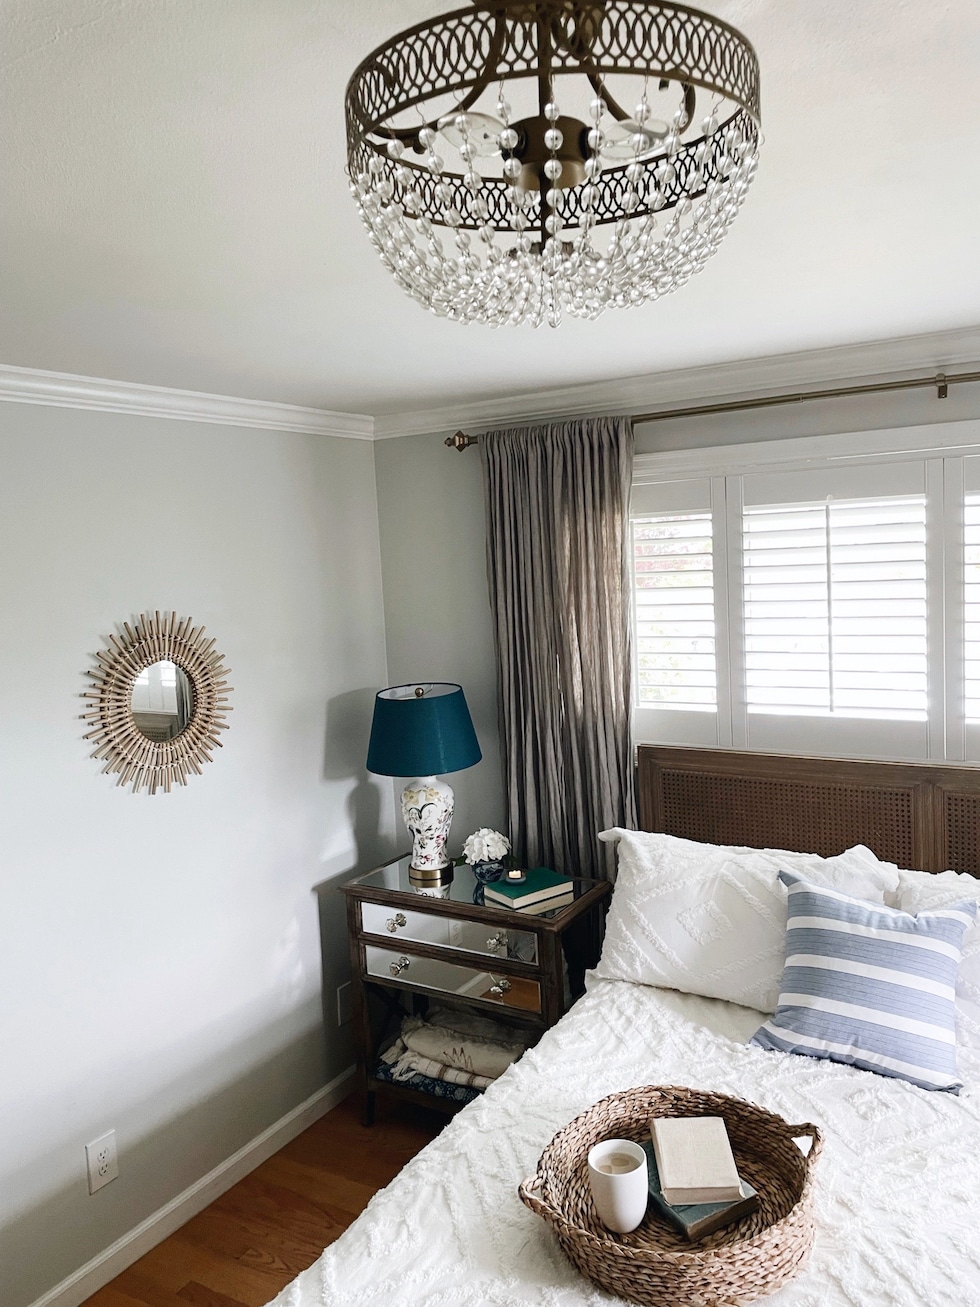 Six Favorite Tips for Decorating a Summer Bedroom